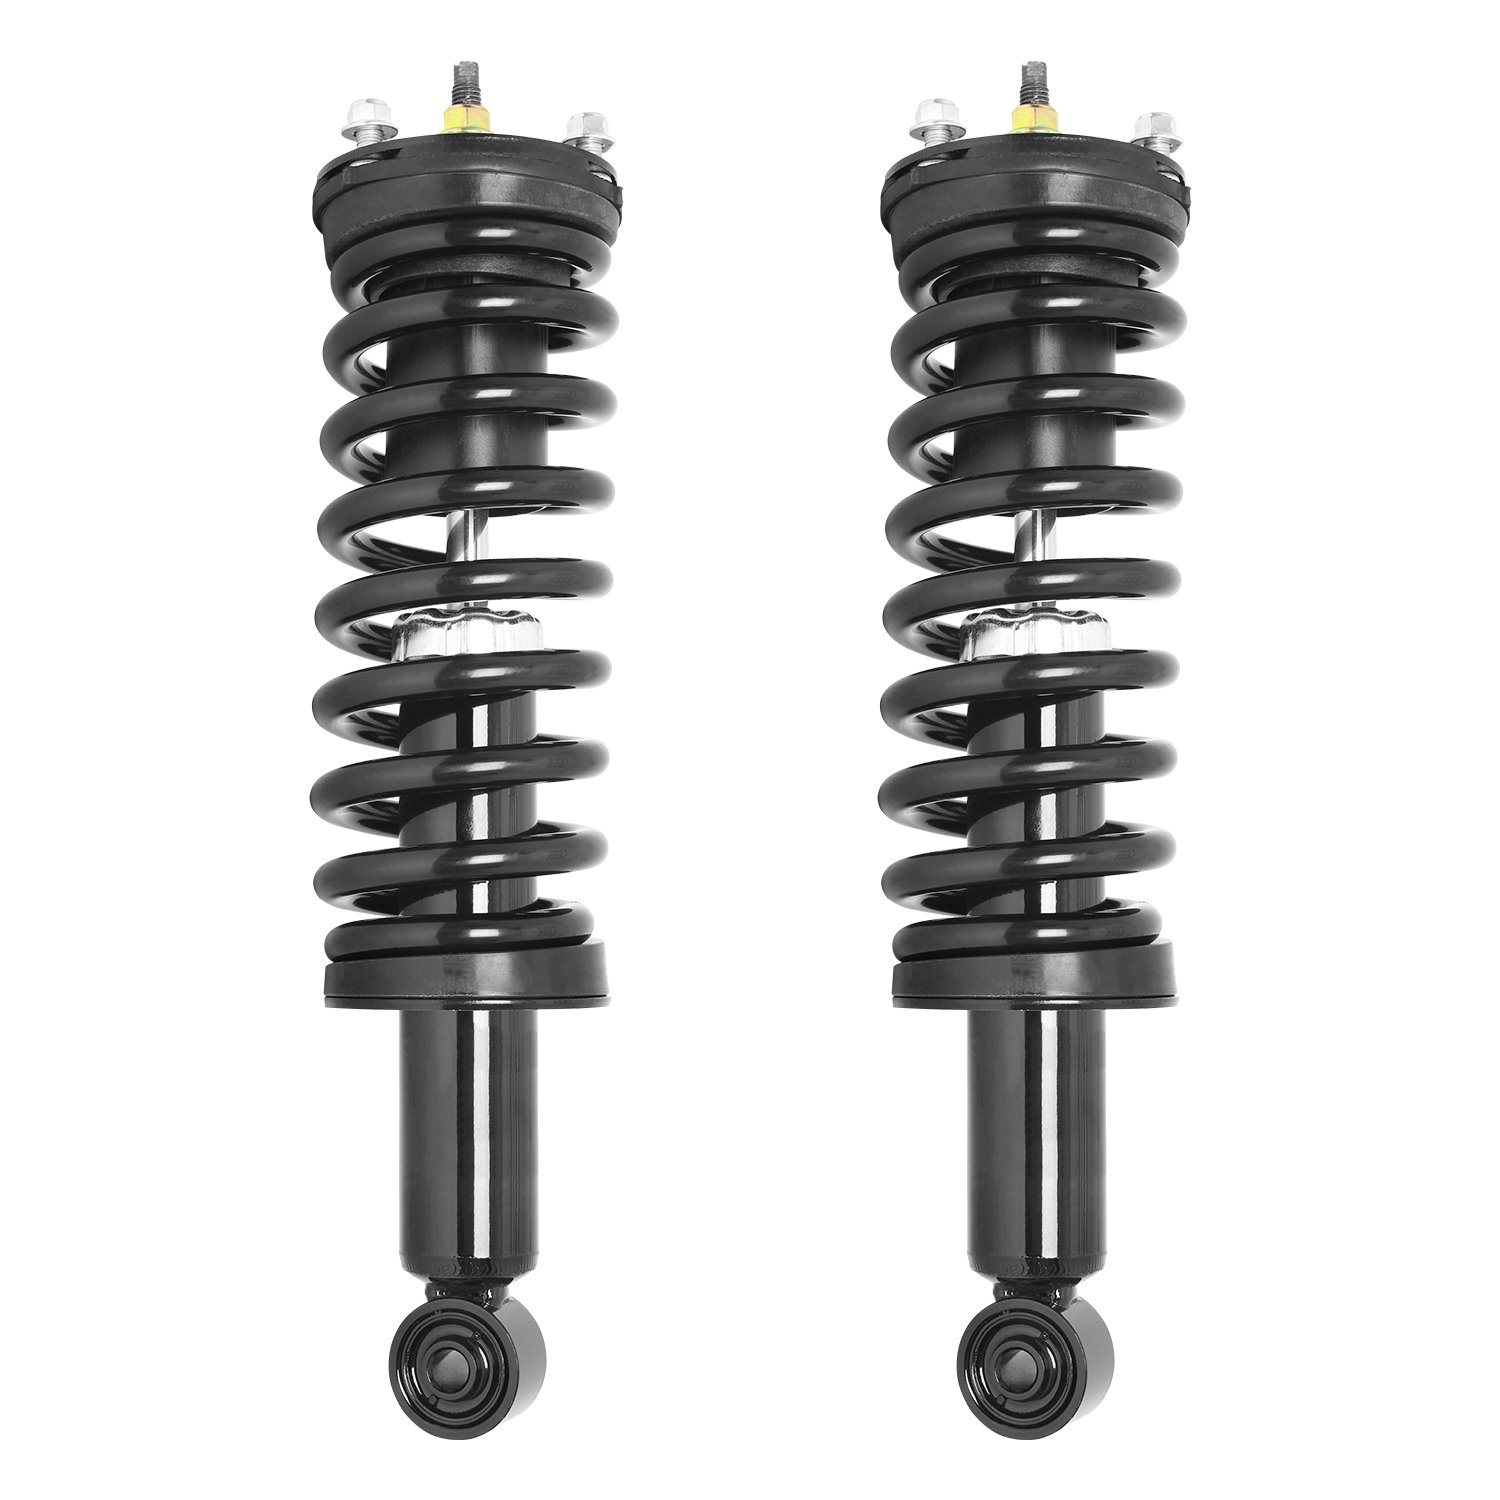 2-11600-001 Suspension Strut & Coil Spring Assembly Set Fits Select Chevy Colorado, GMC Canyon